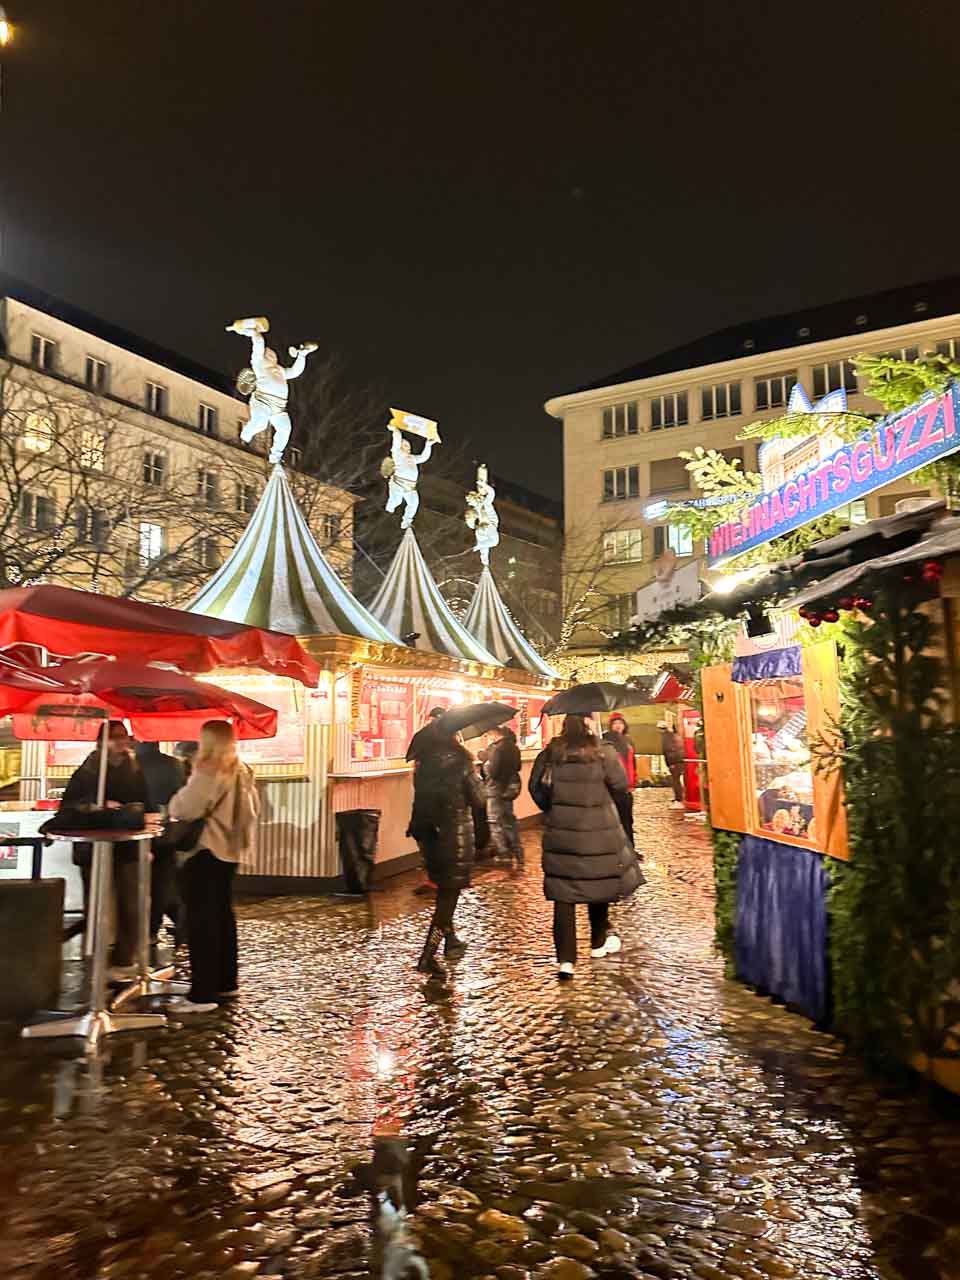 People strolling through the Basel Christmas market on Barfüsserplatz at night, with bright stalls and decorations